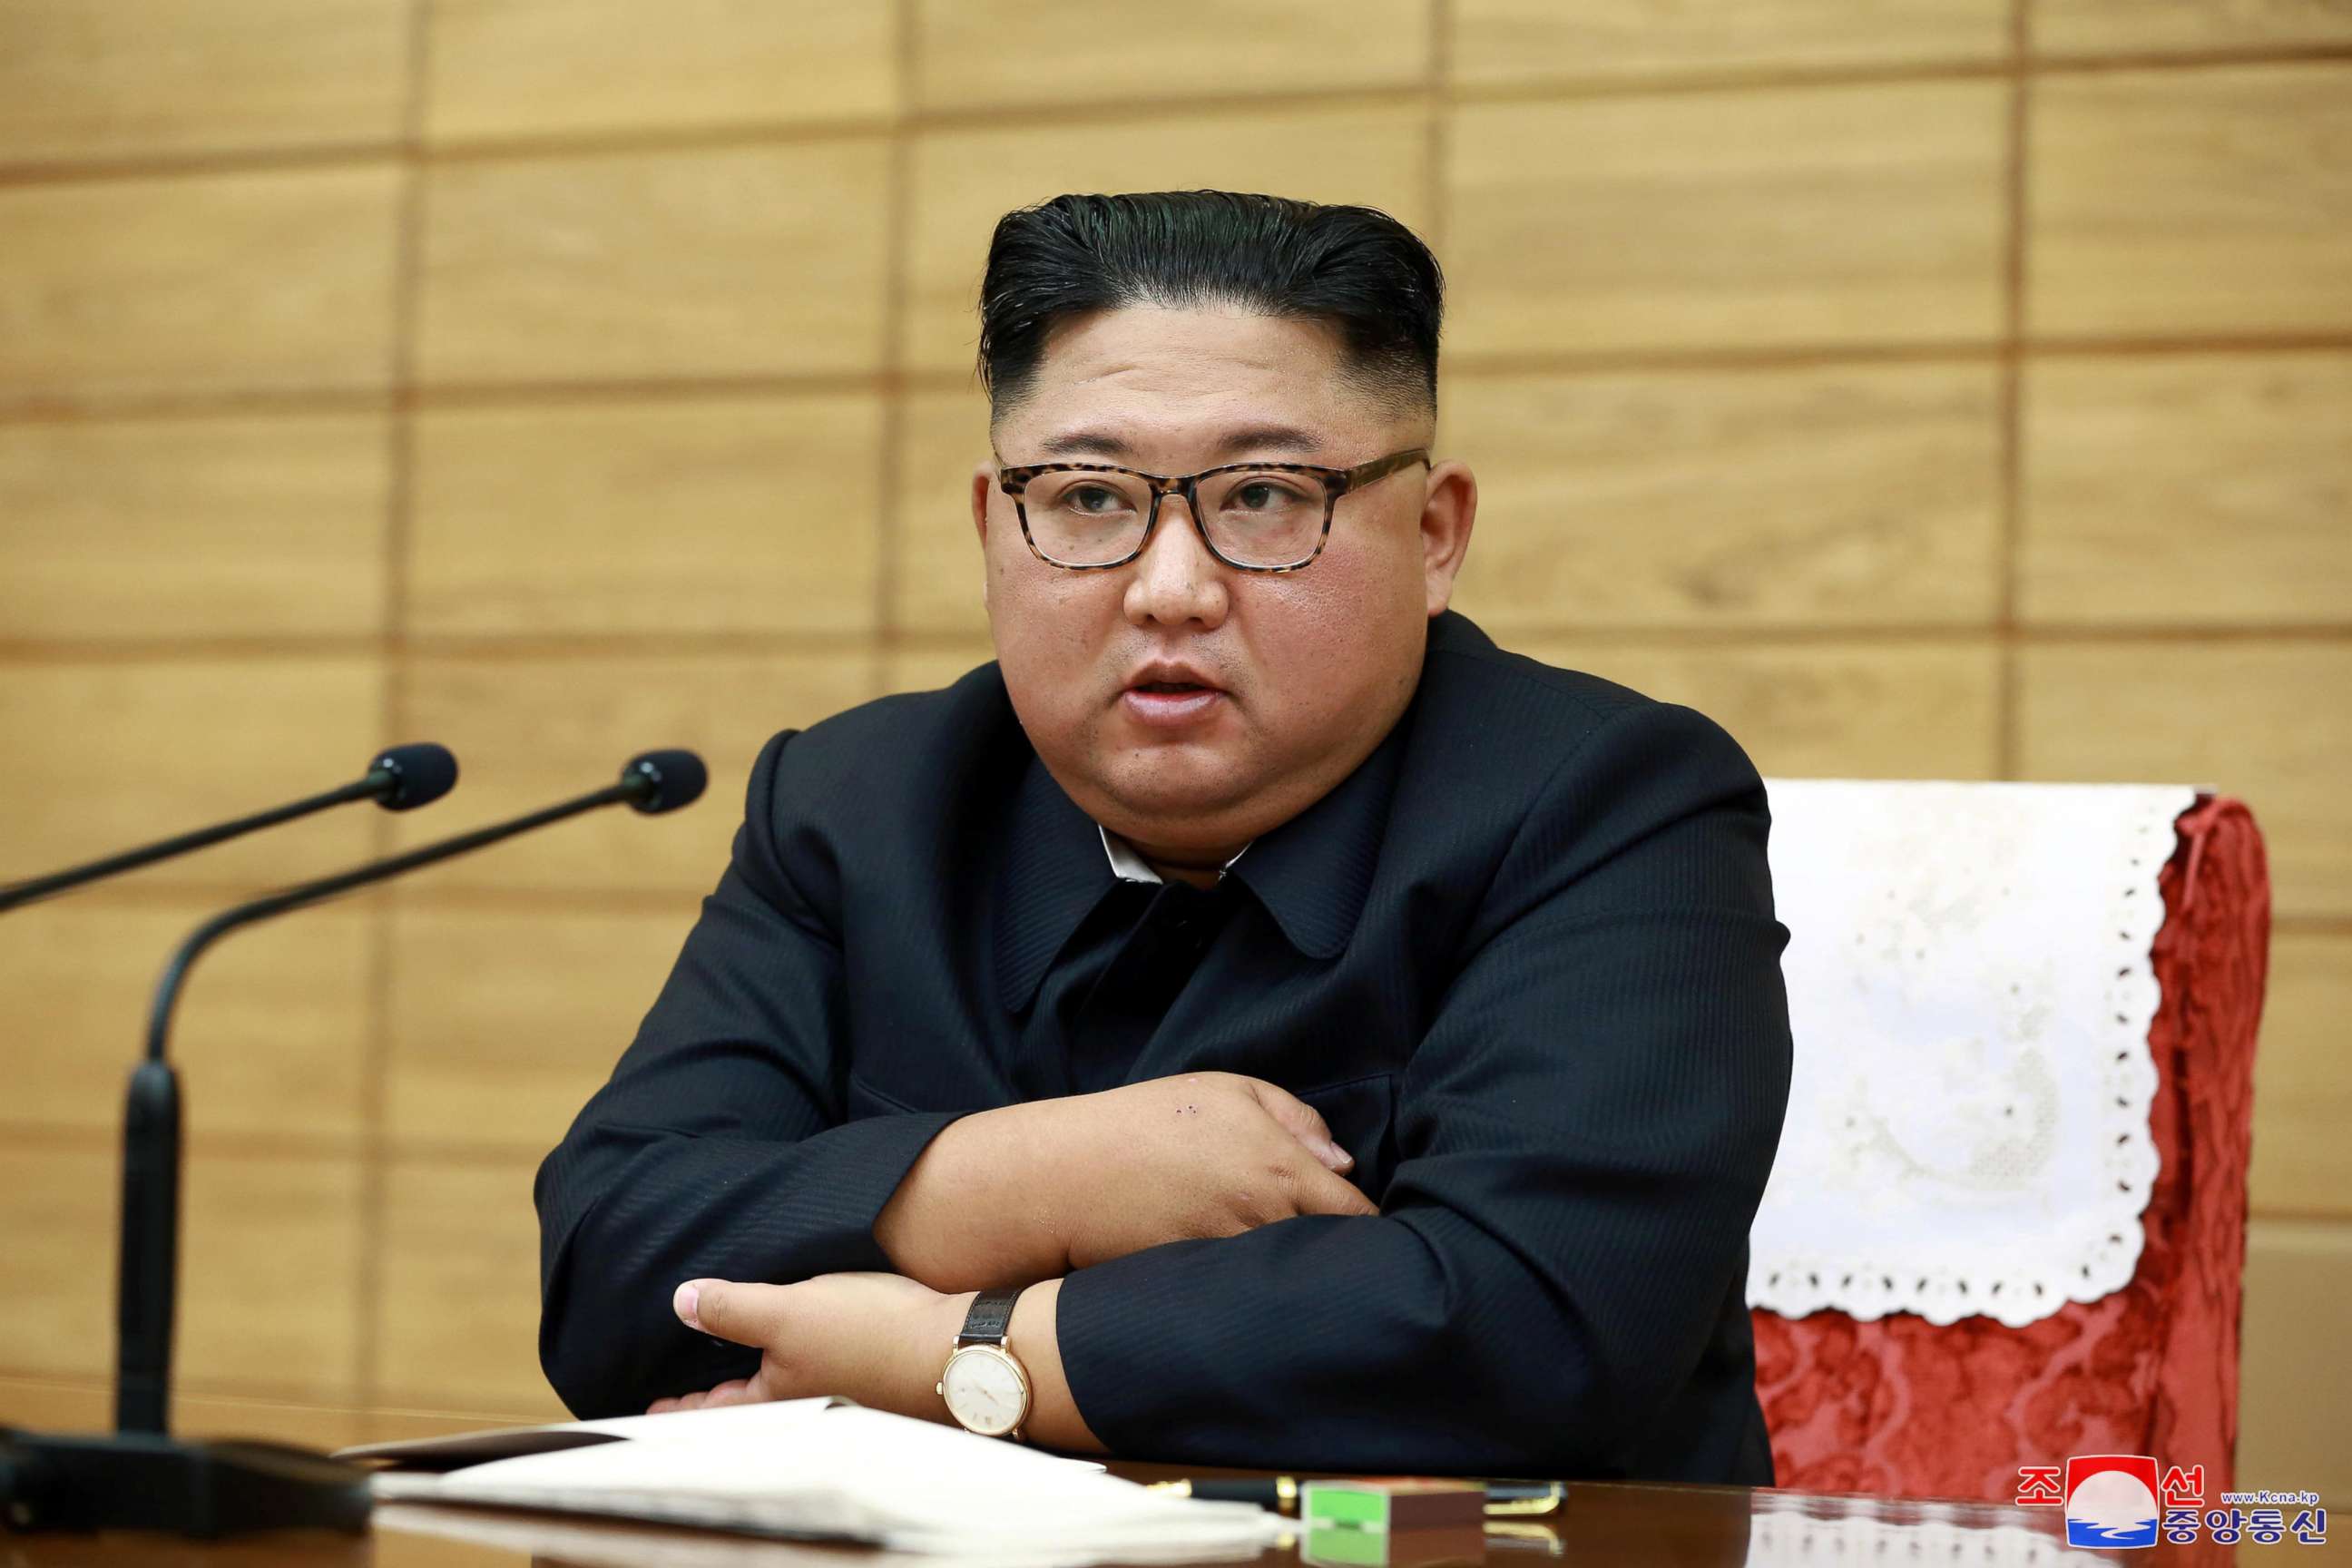 PHOTO: North Korean leader Kim Jong Un attends the Emergency Convocation of the Central Military Committee Emergency Expansion Meeting of the Workers' Party of North Korea in this undated photo released, Sept. 6, 2019.